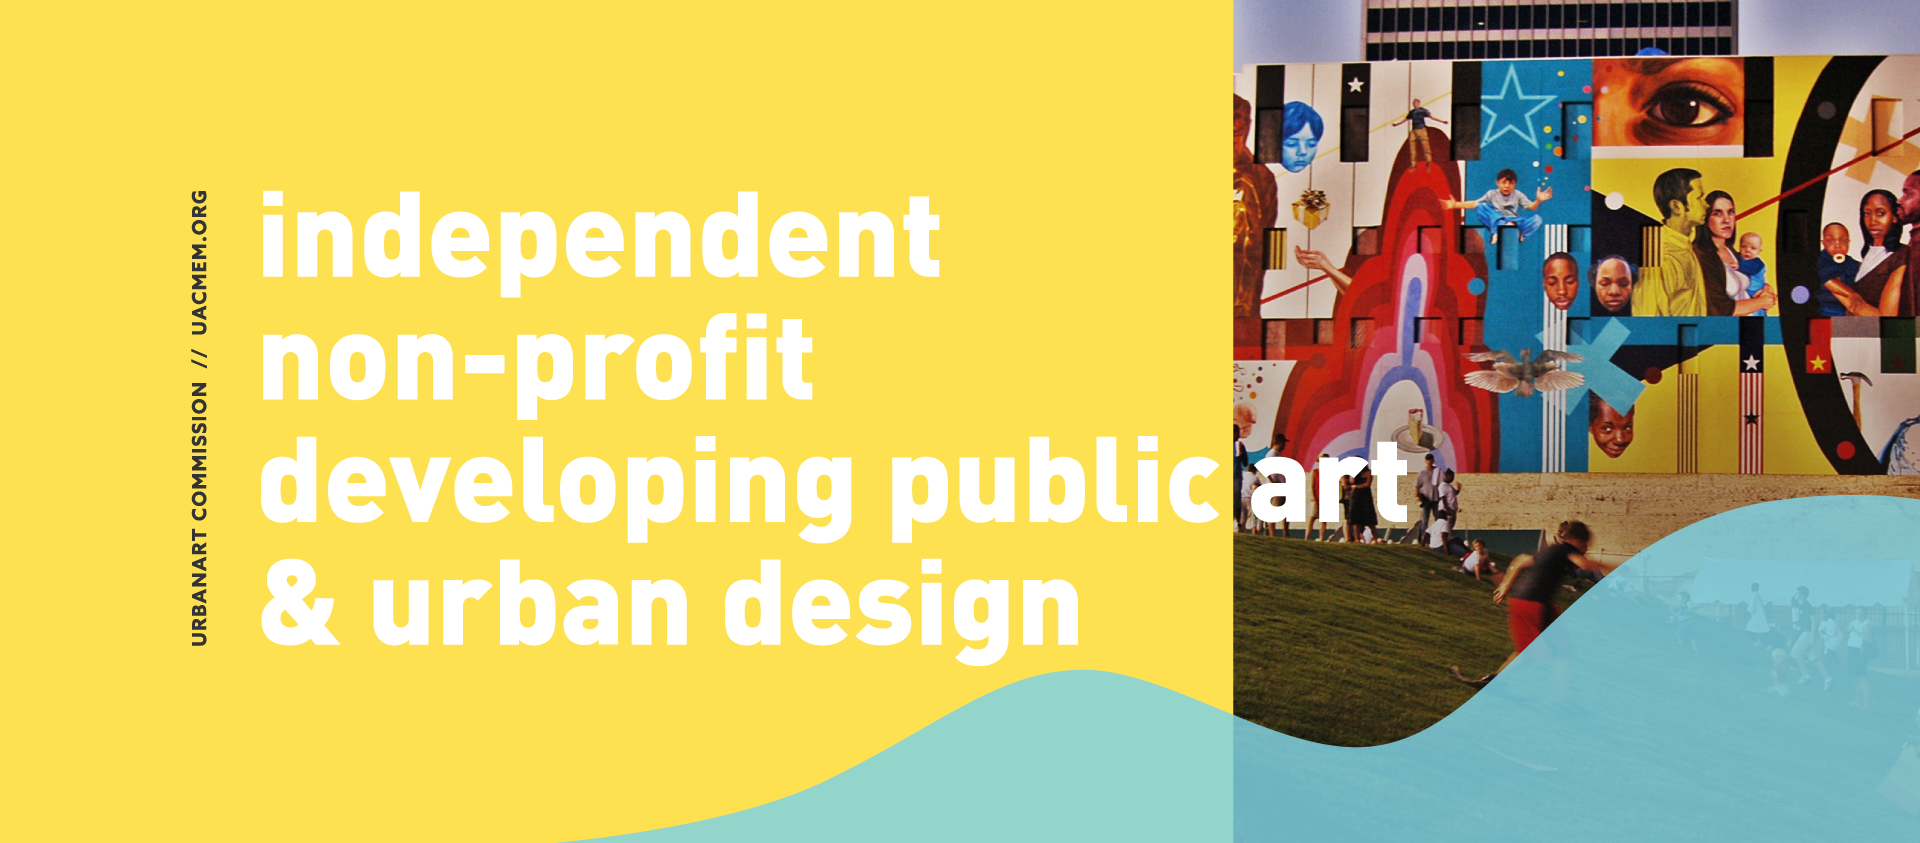 Independent non-profit organization developing public art and urban design as the Urban Art Commission.